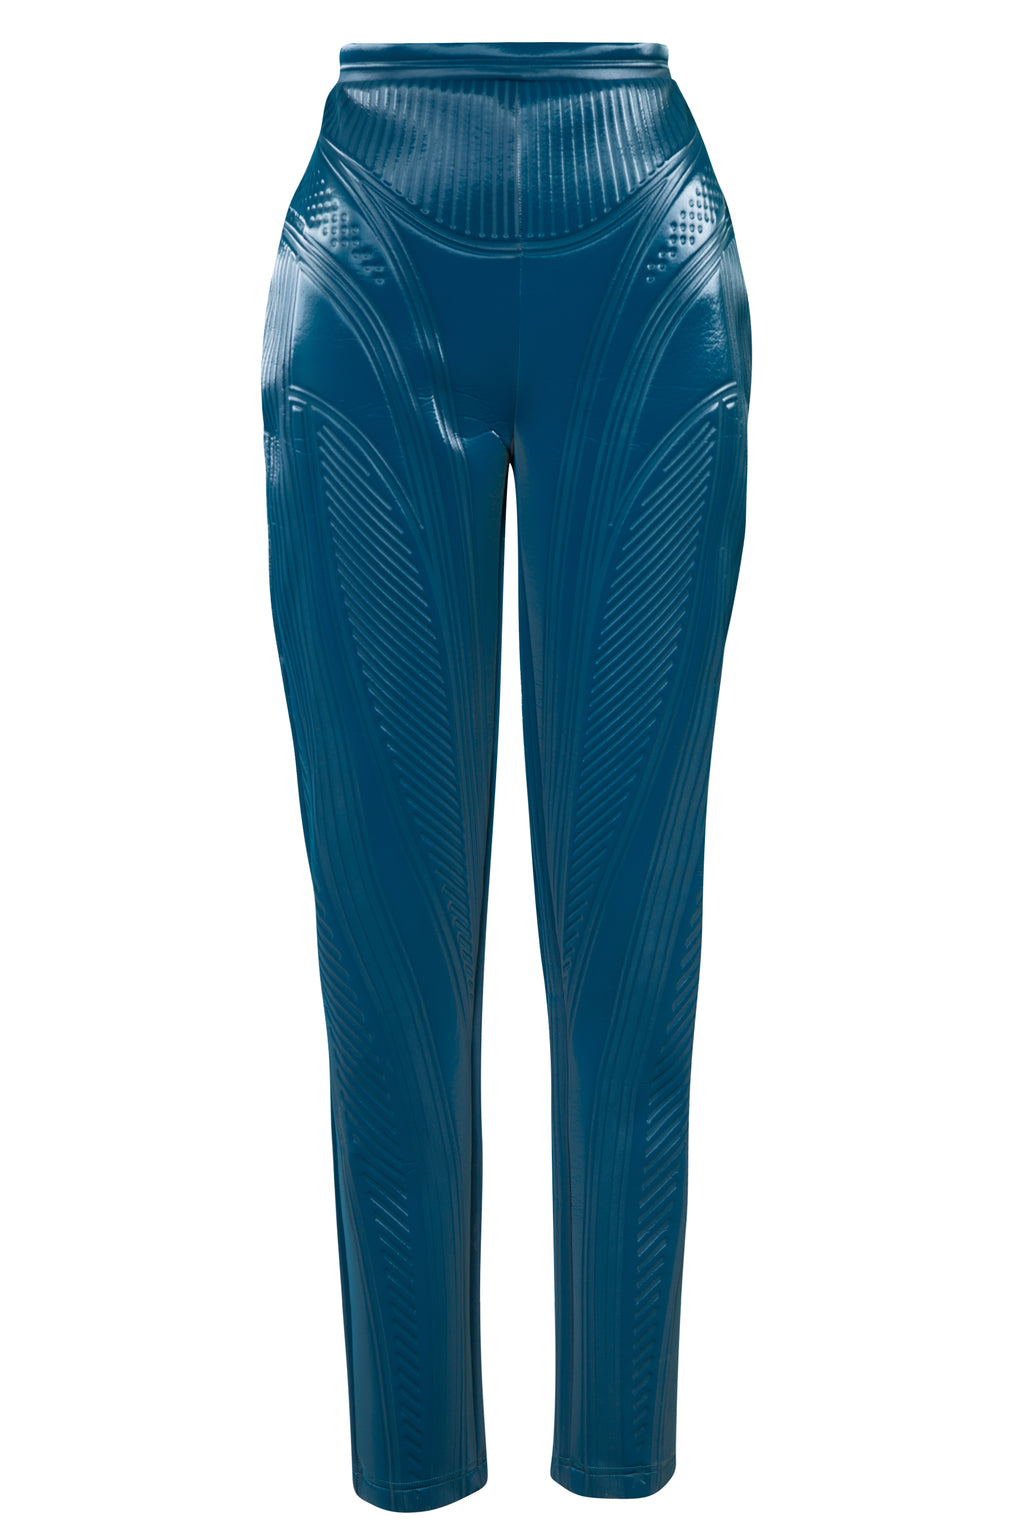 Mugler Blue Embossed Leggings  new with tags (est. retail $720